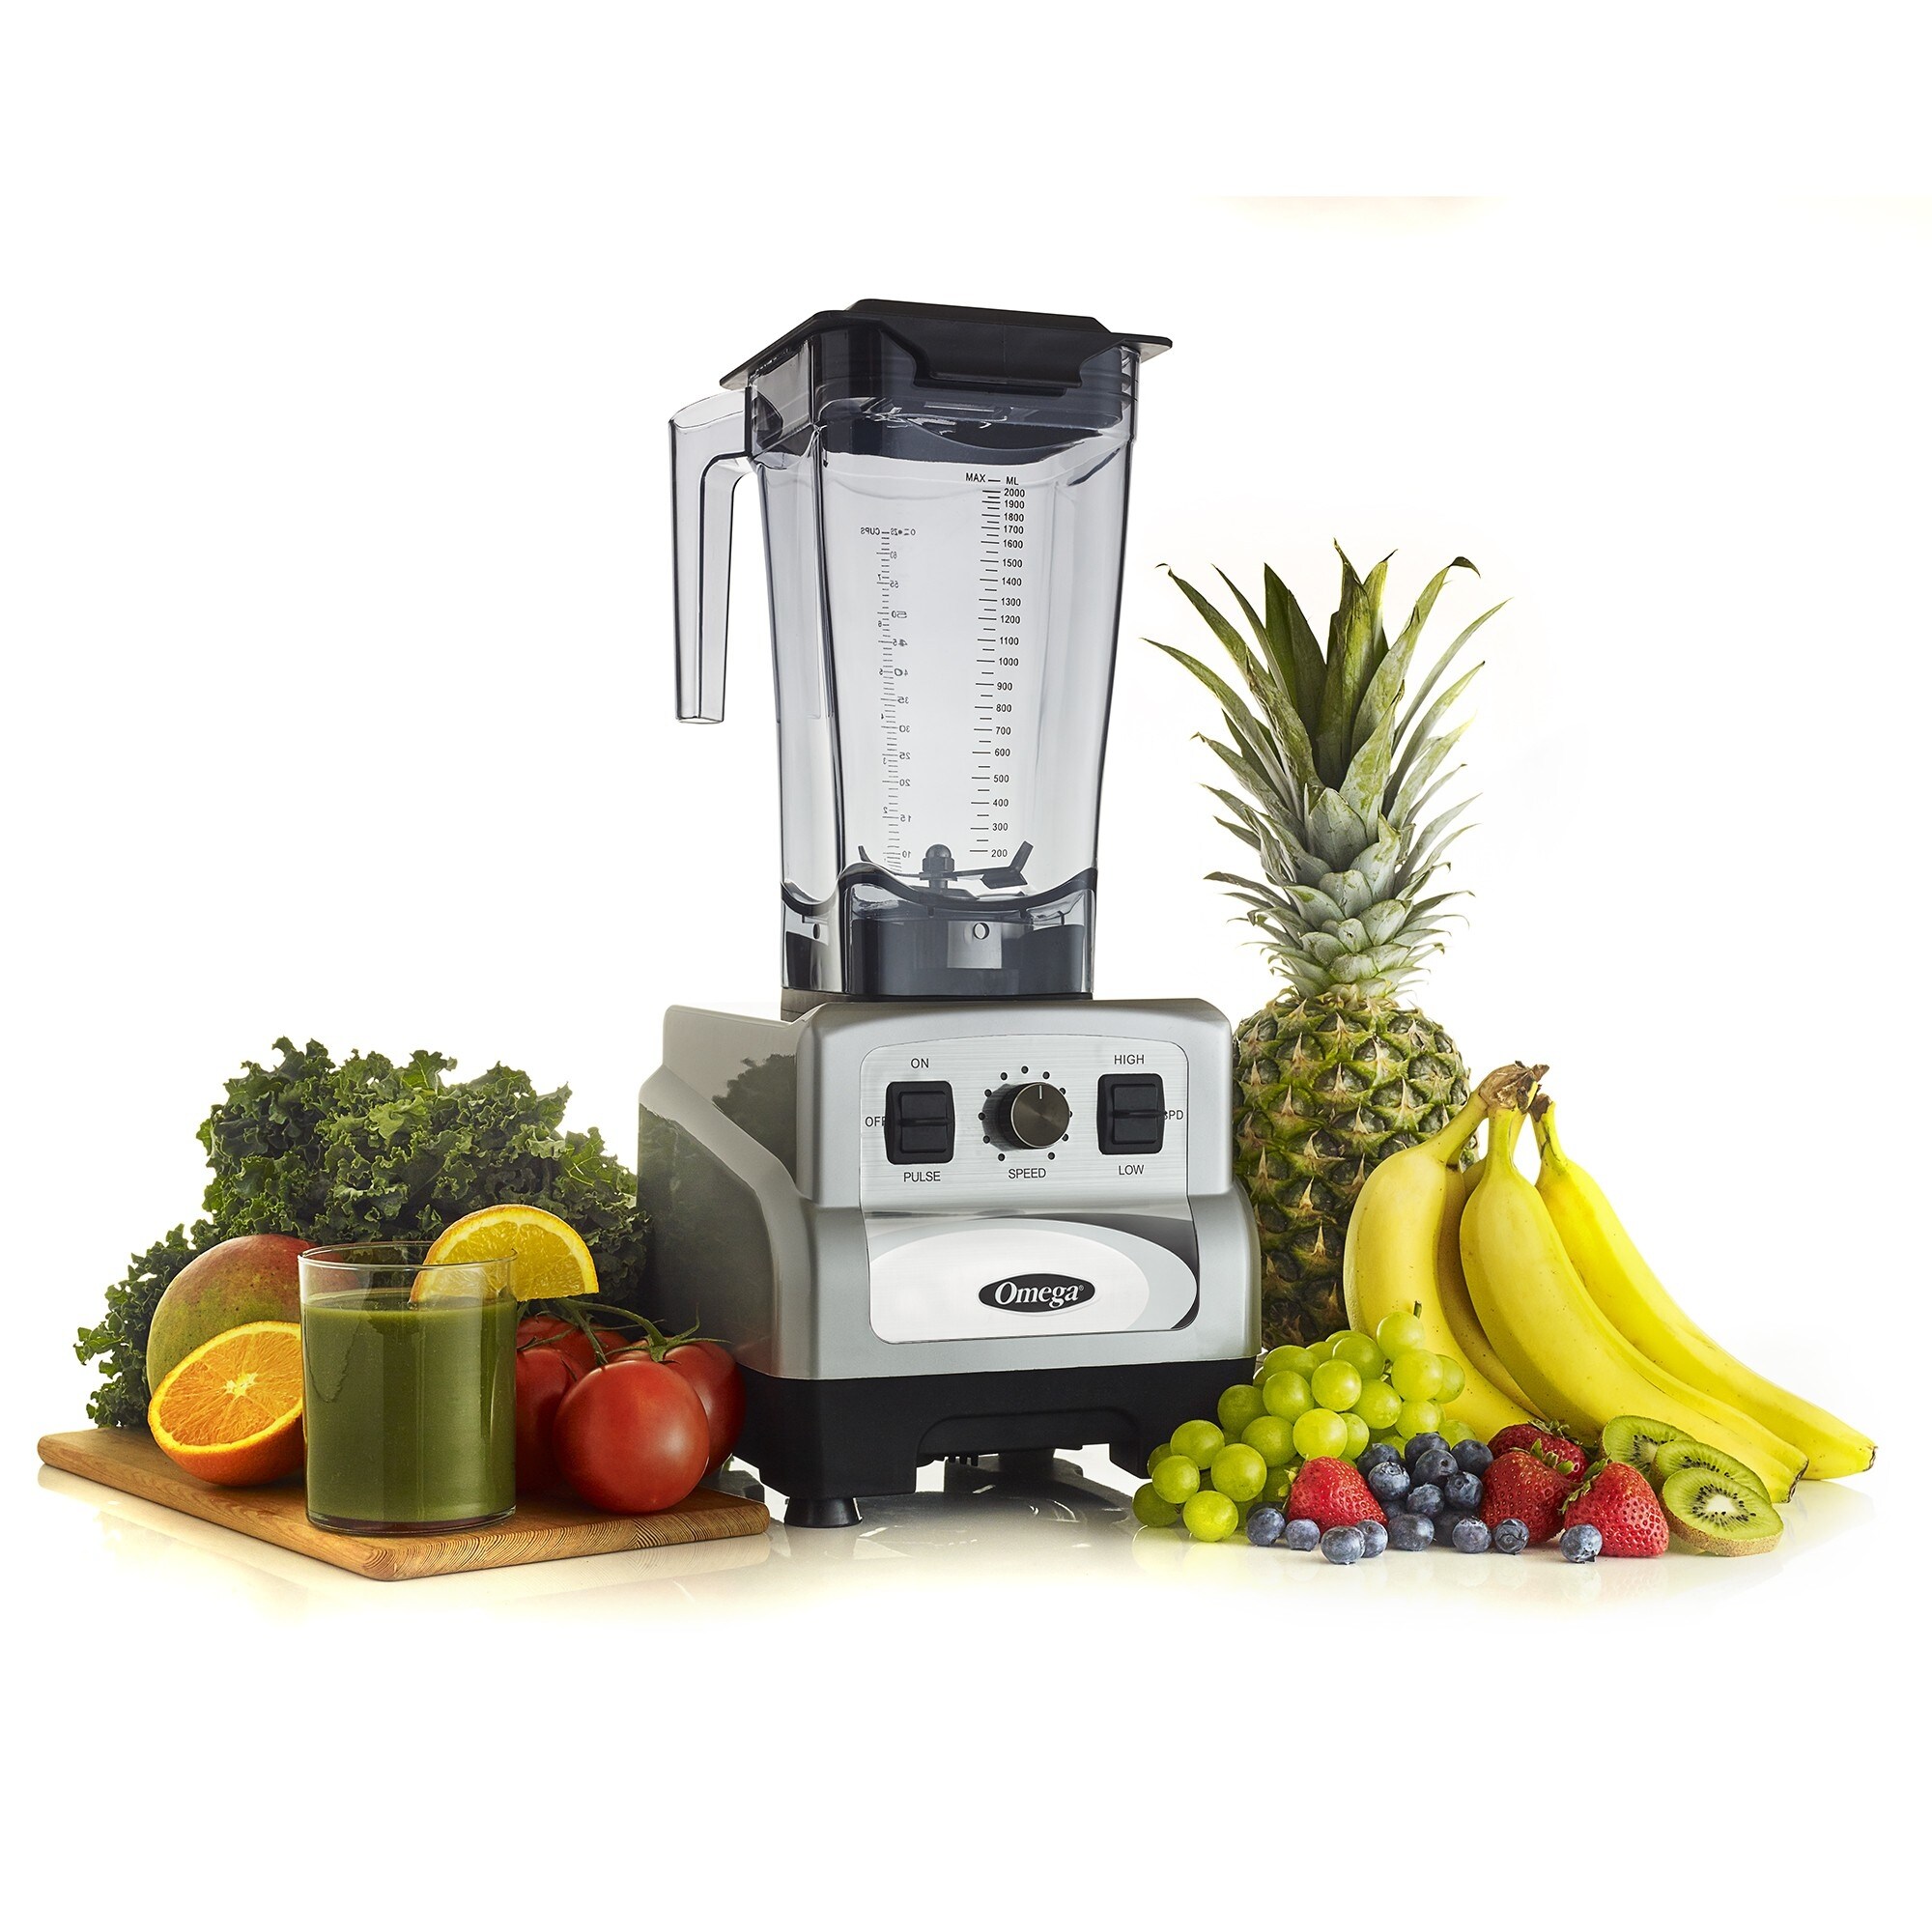 https://ak1.ostkcdn.com/images/products/is/images/direct/3dbcab72fb75d21c522b72a6292c0a58b32946ff/Omega-OM6560S-3-Peak-HP-Blender-with-64oz-Container%2C-Silver-%26-Black.jpg